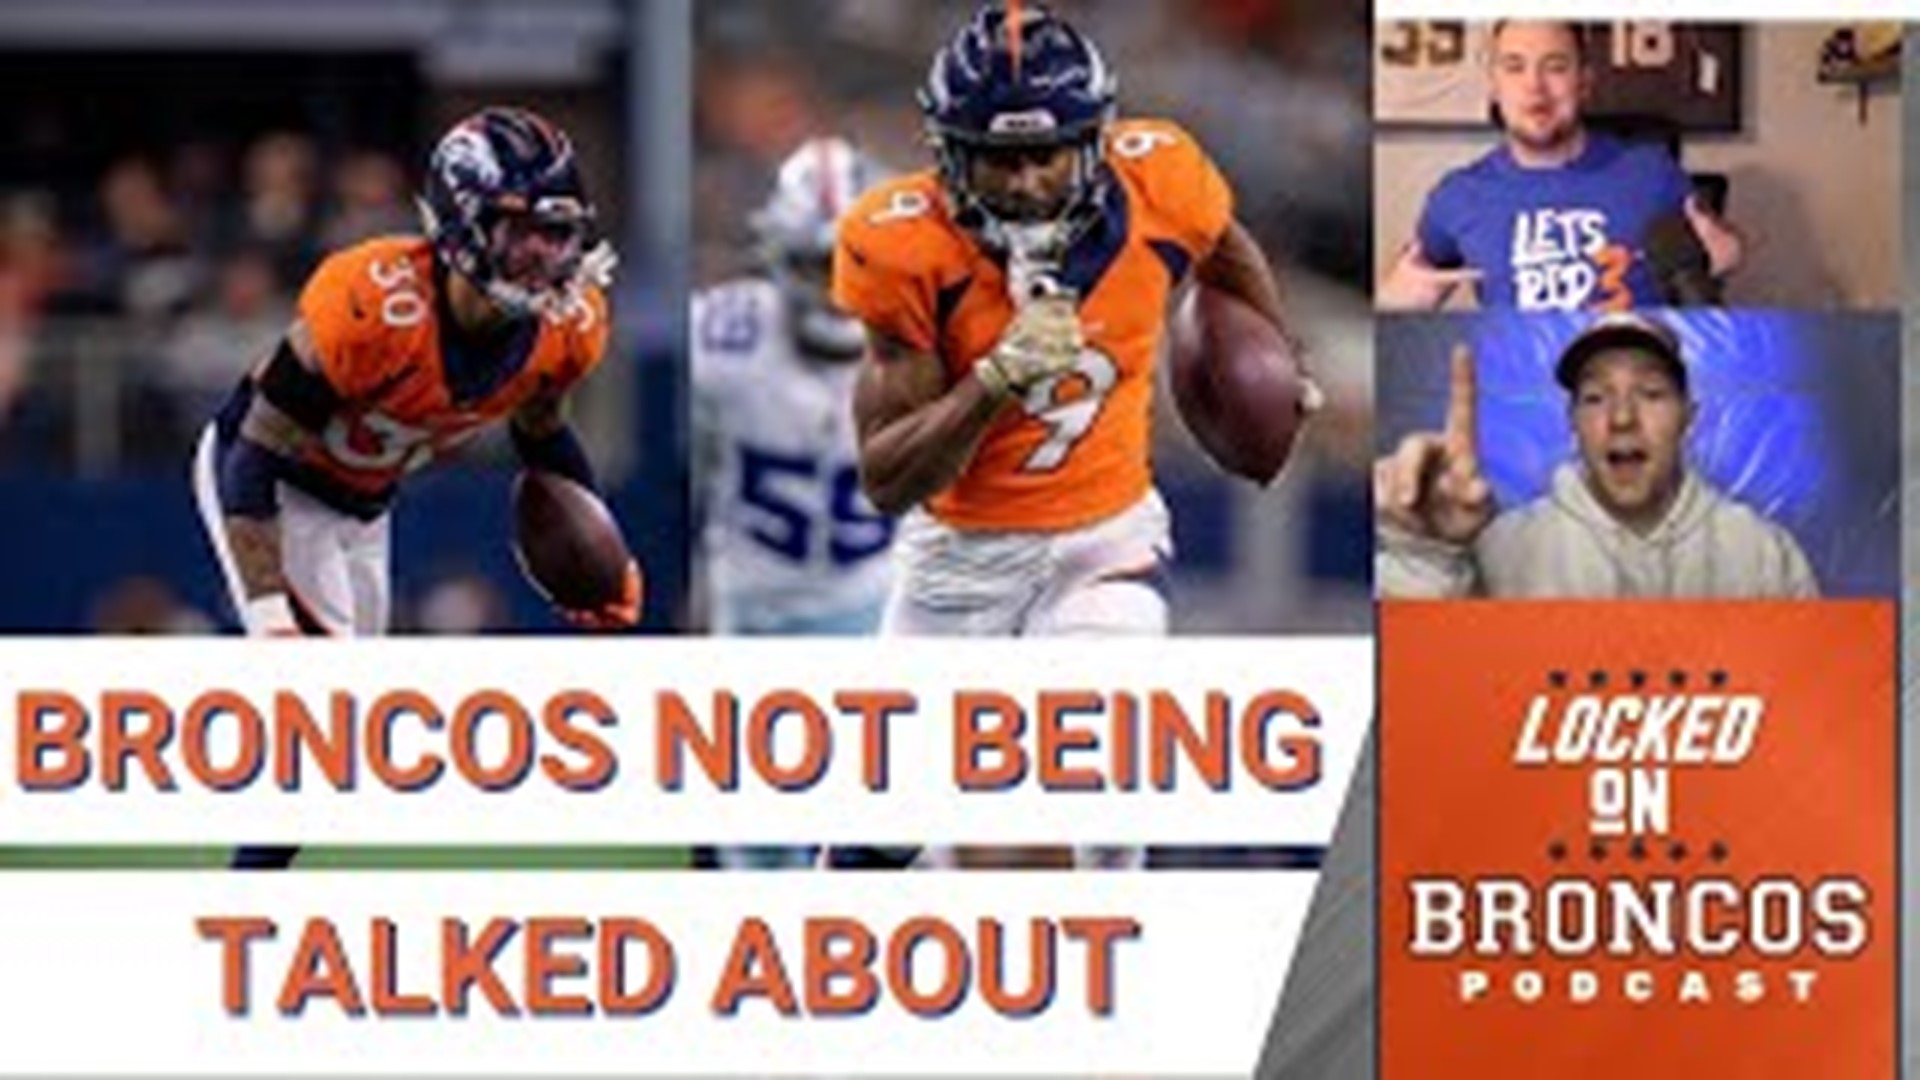 As the Denver Broncos continue OTAs this week, which Broncos players haven't been talked about enough during the buildup toward Training Camp?